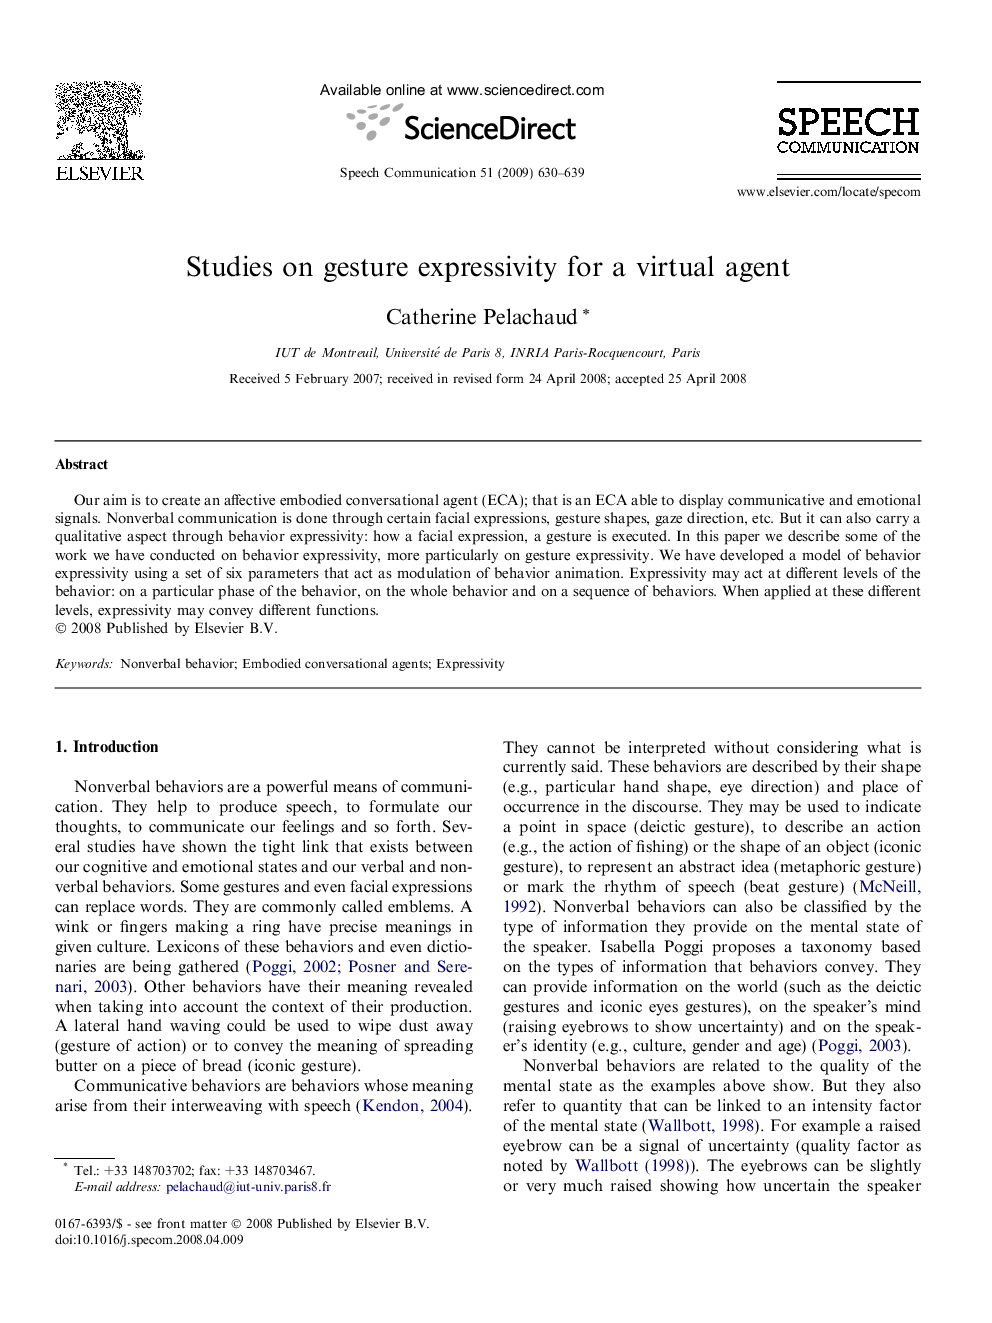 Studies on gesture expressivity for a virtual agent